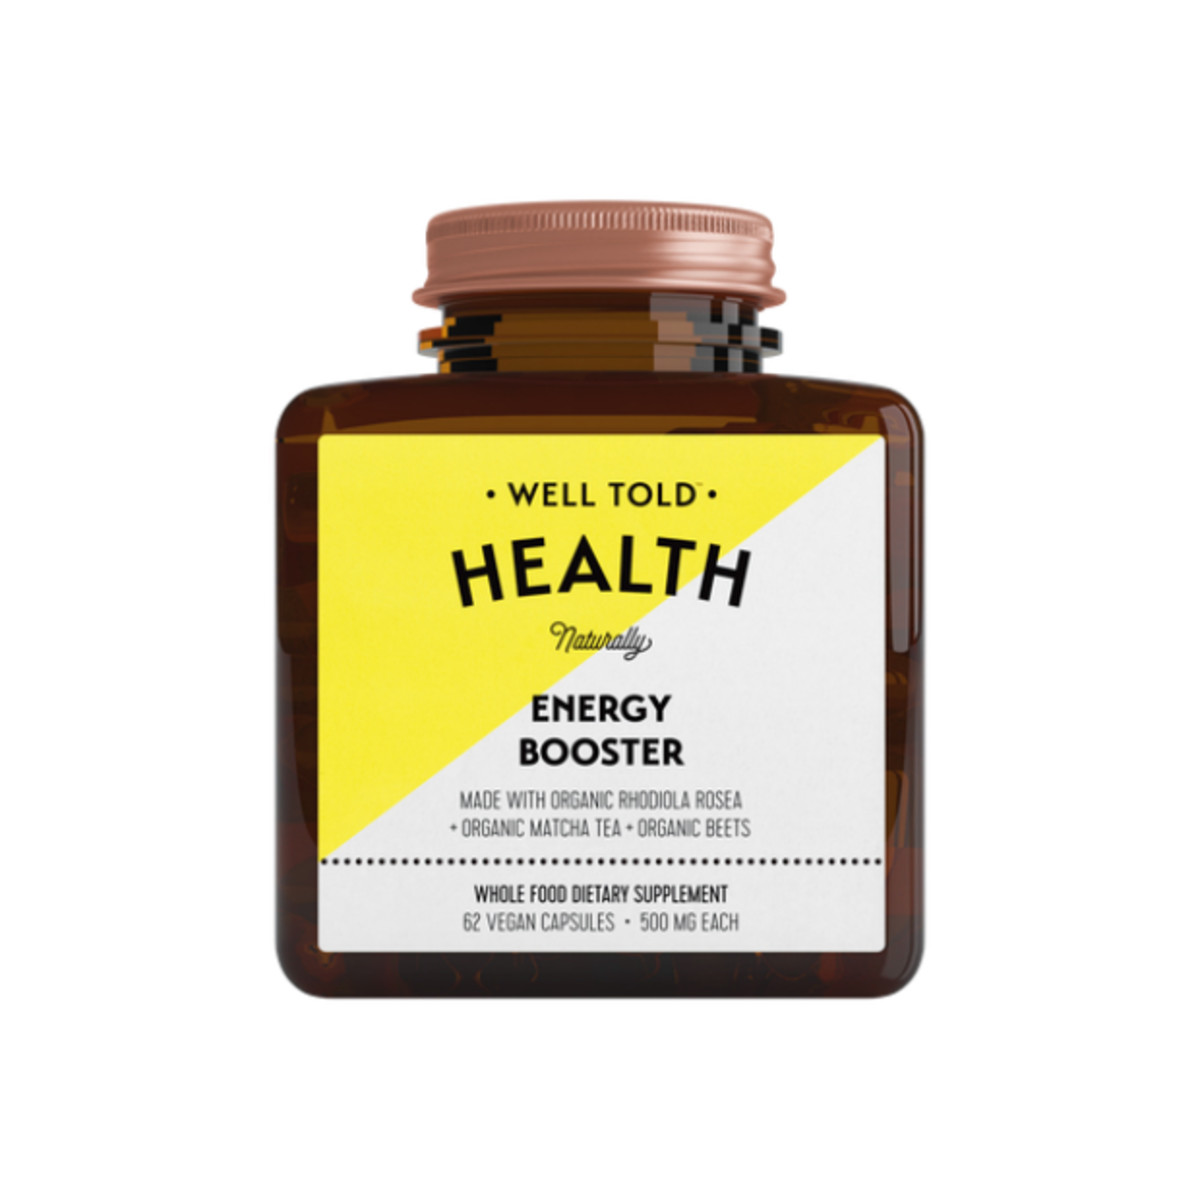 Energy Booster, $36, available at Well Told Health.